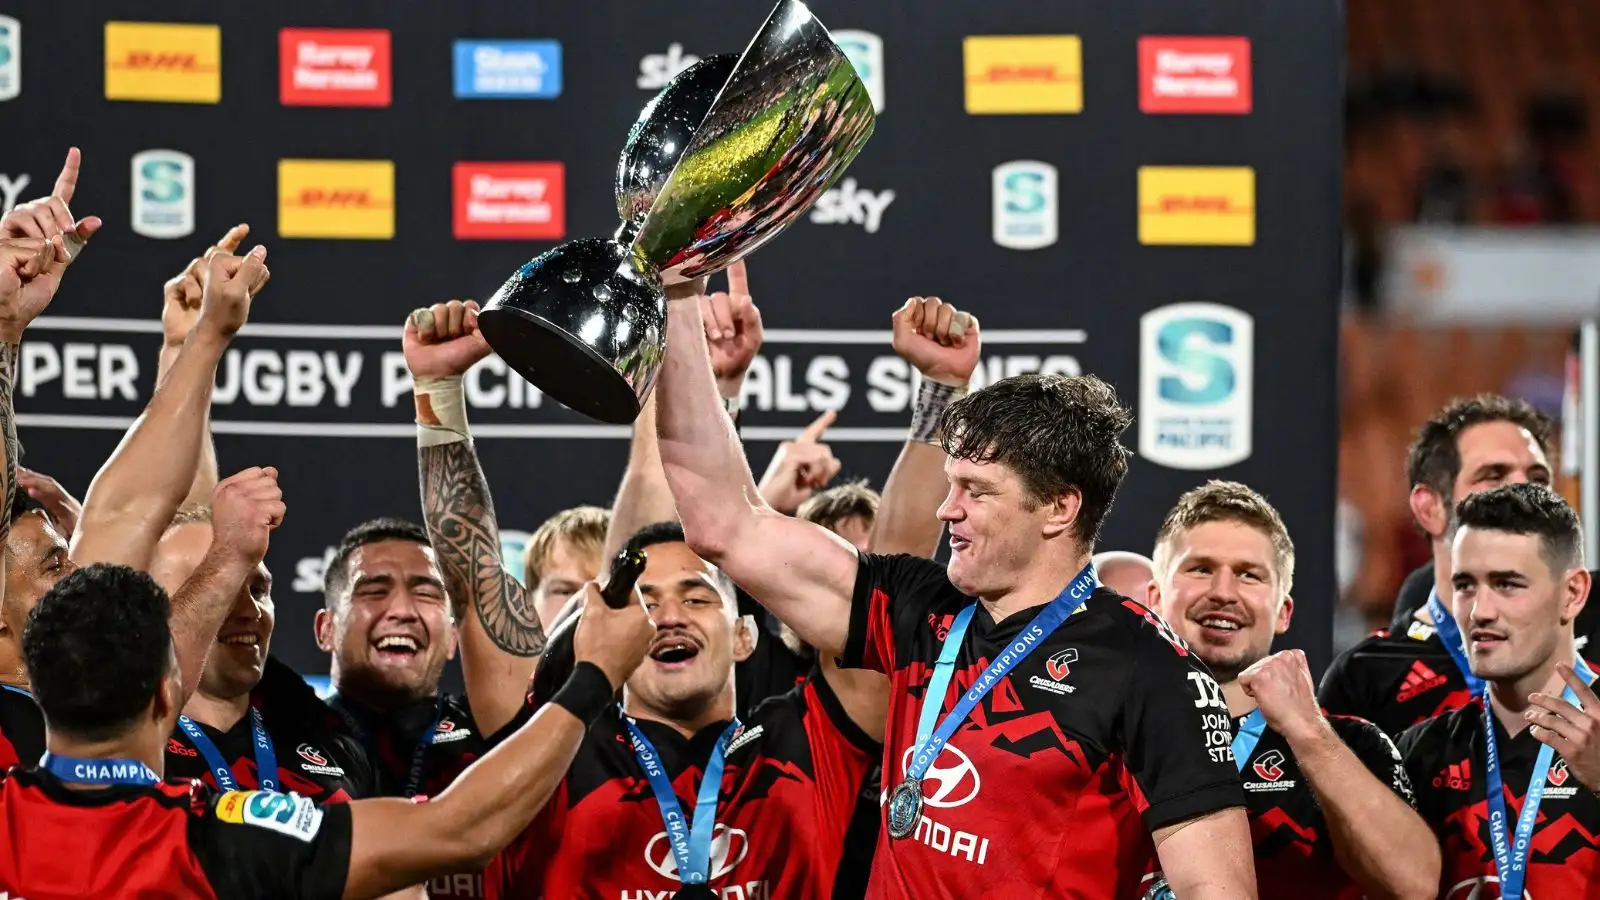 Crusaders captain Scott Barrett holds the trophy aloft as he celebrates with teammates after defeating the chiefs in the Super Rugby Pacific final in Hamilton, New Zealand, Saturday, June 24, 2023.